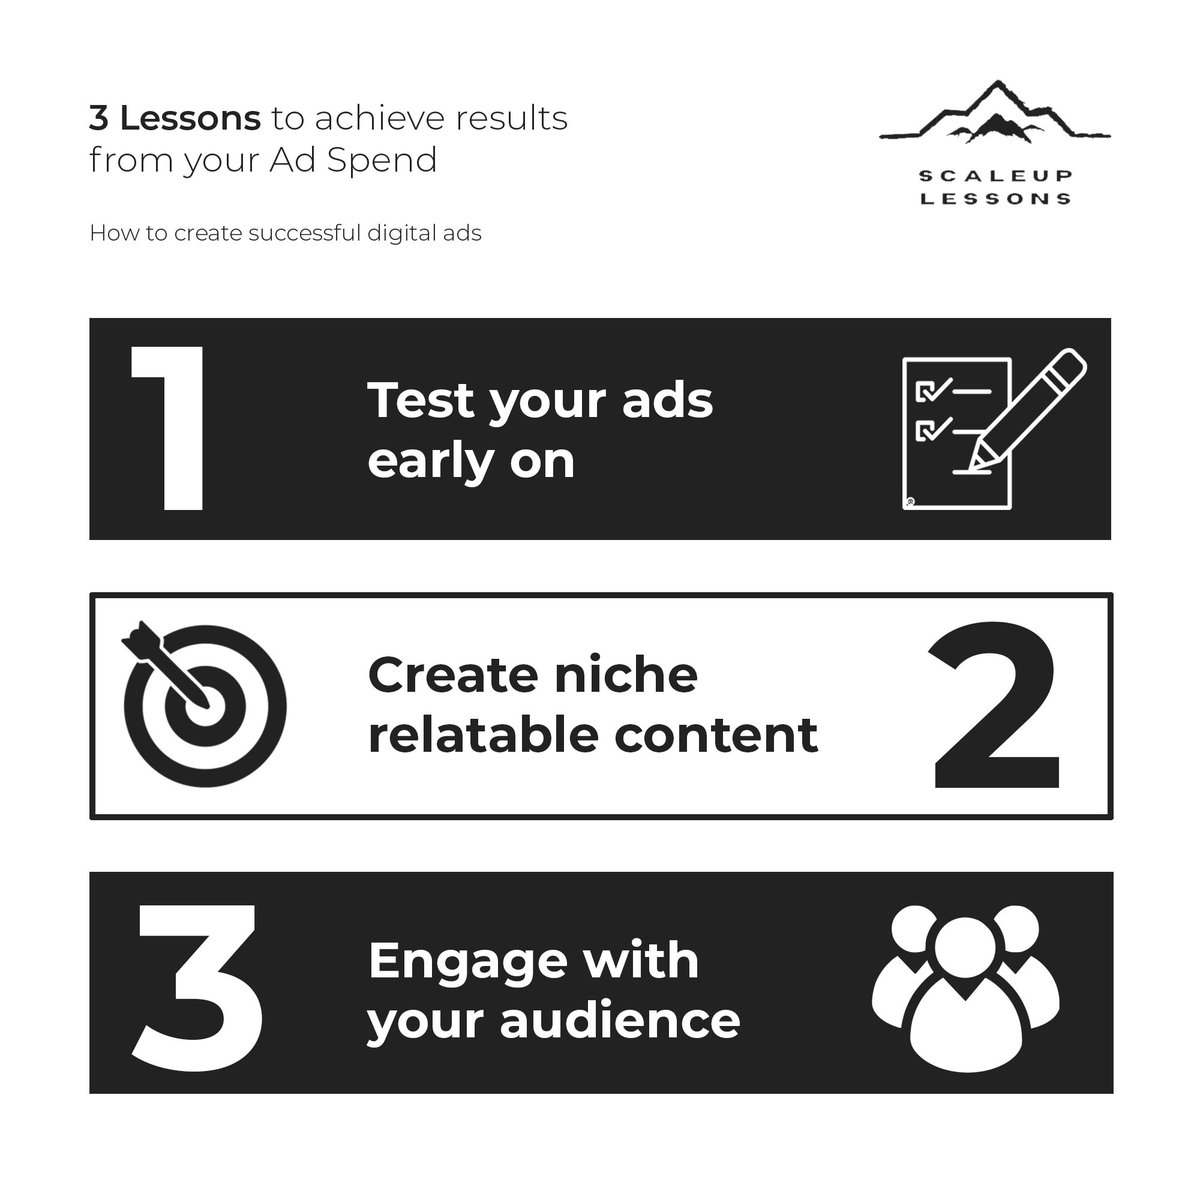 3 Lessons to Achieve Results from Your Ad Spend 💰

1. Test your ads early on
2. Create niche relatable content
3. Engage with your audience

medium.com/scaleuplessons…

#paidads #digitalmarketing #paidadvertising #digitalads #facebookads #googleads #ppc #payperclick #payperclickads